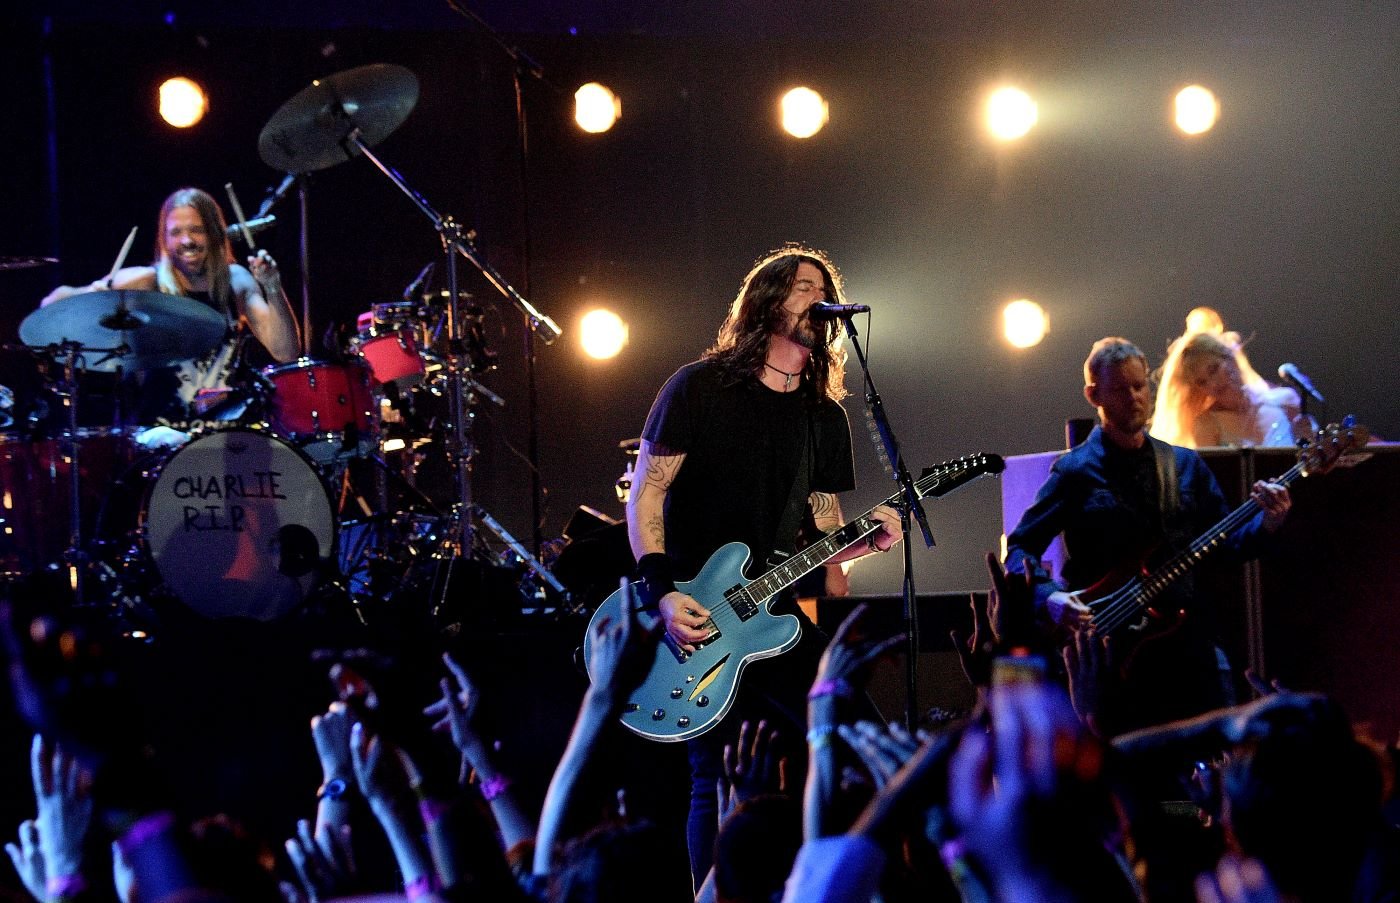 Foo Fighters performing on stage with a background of numerous white lights.